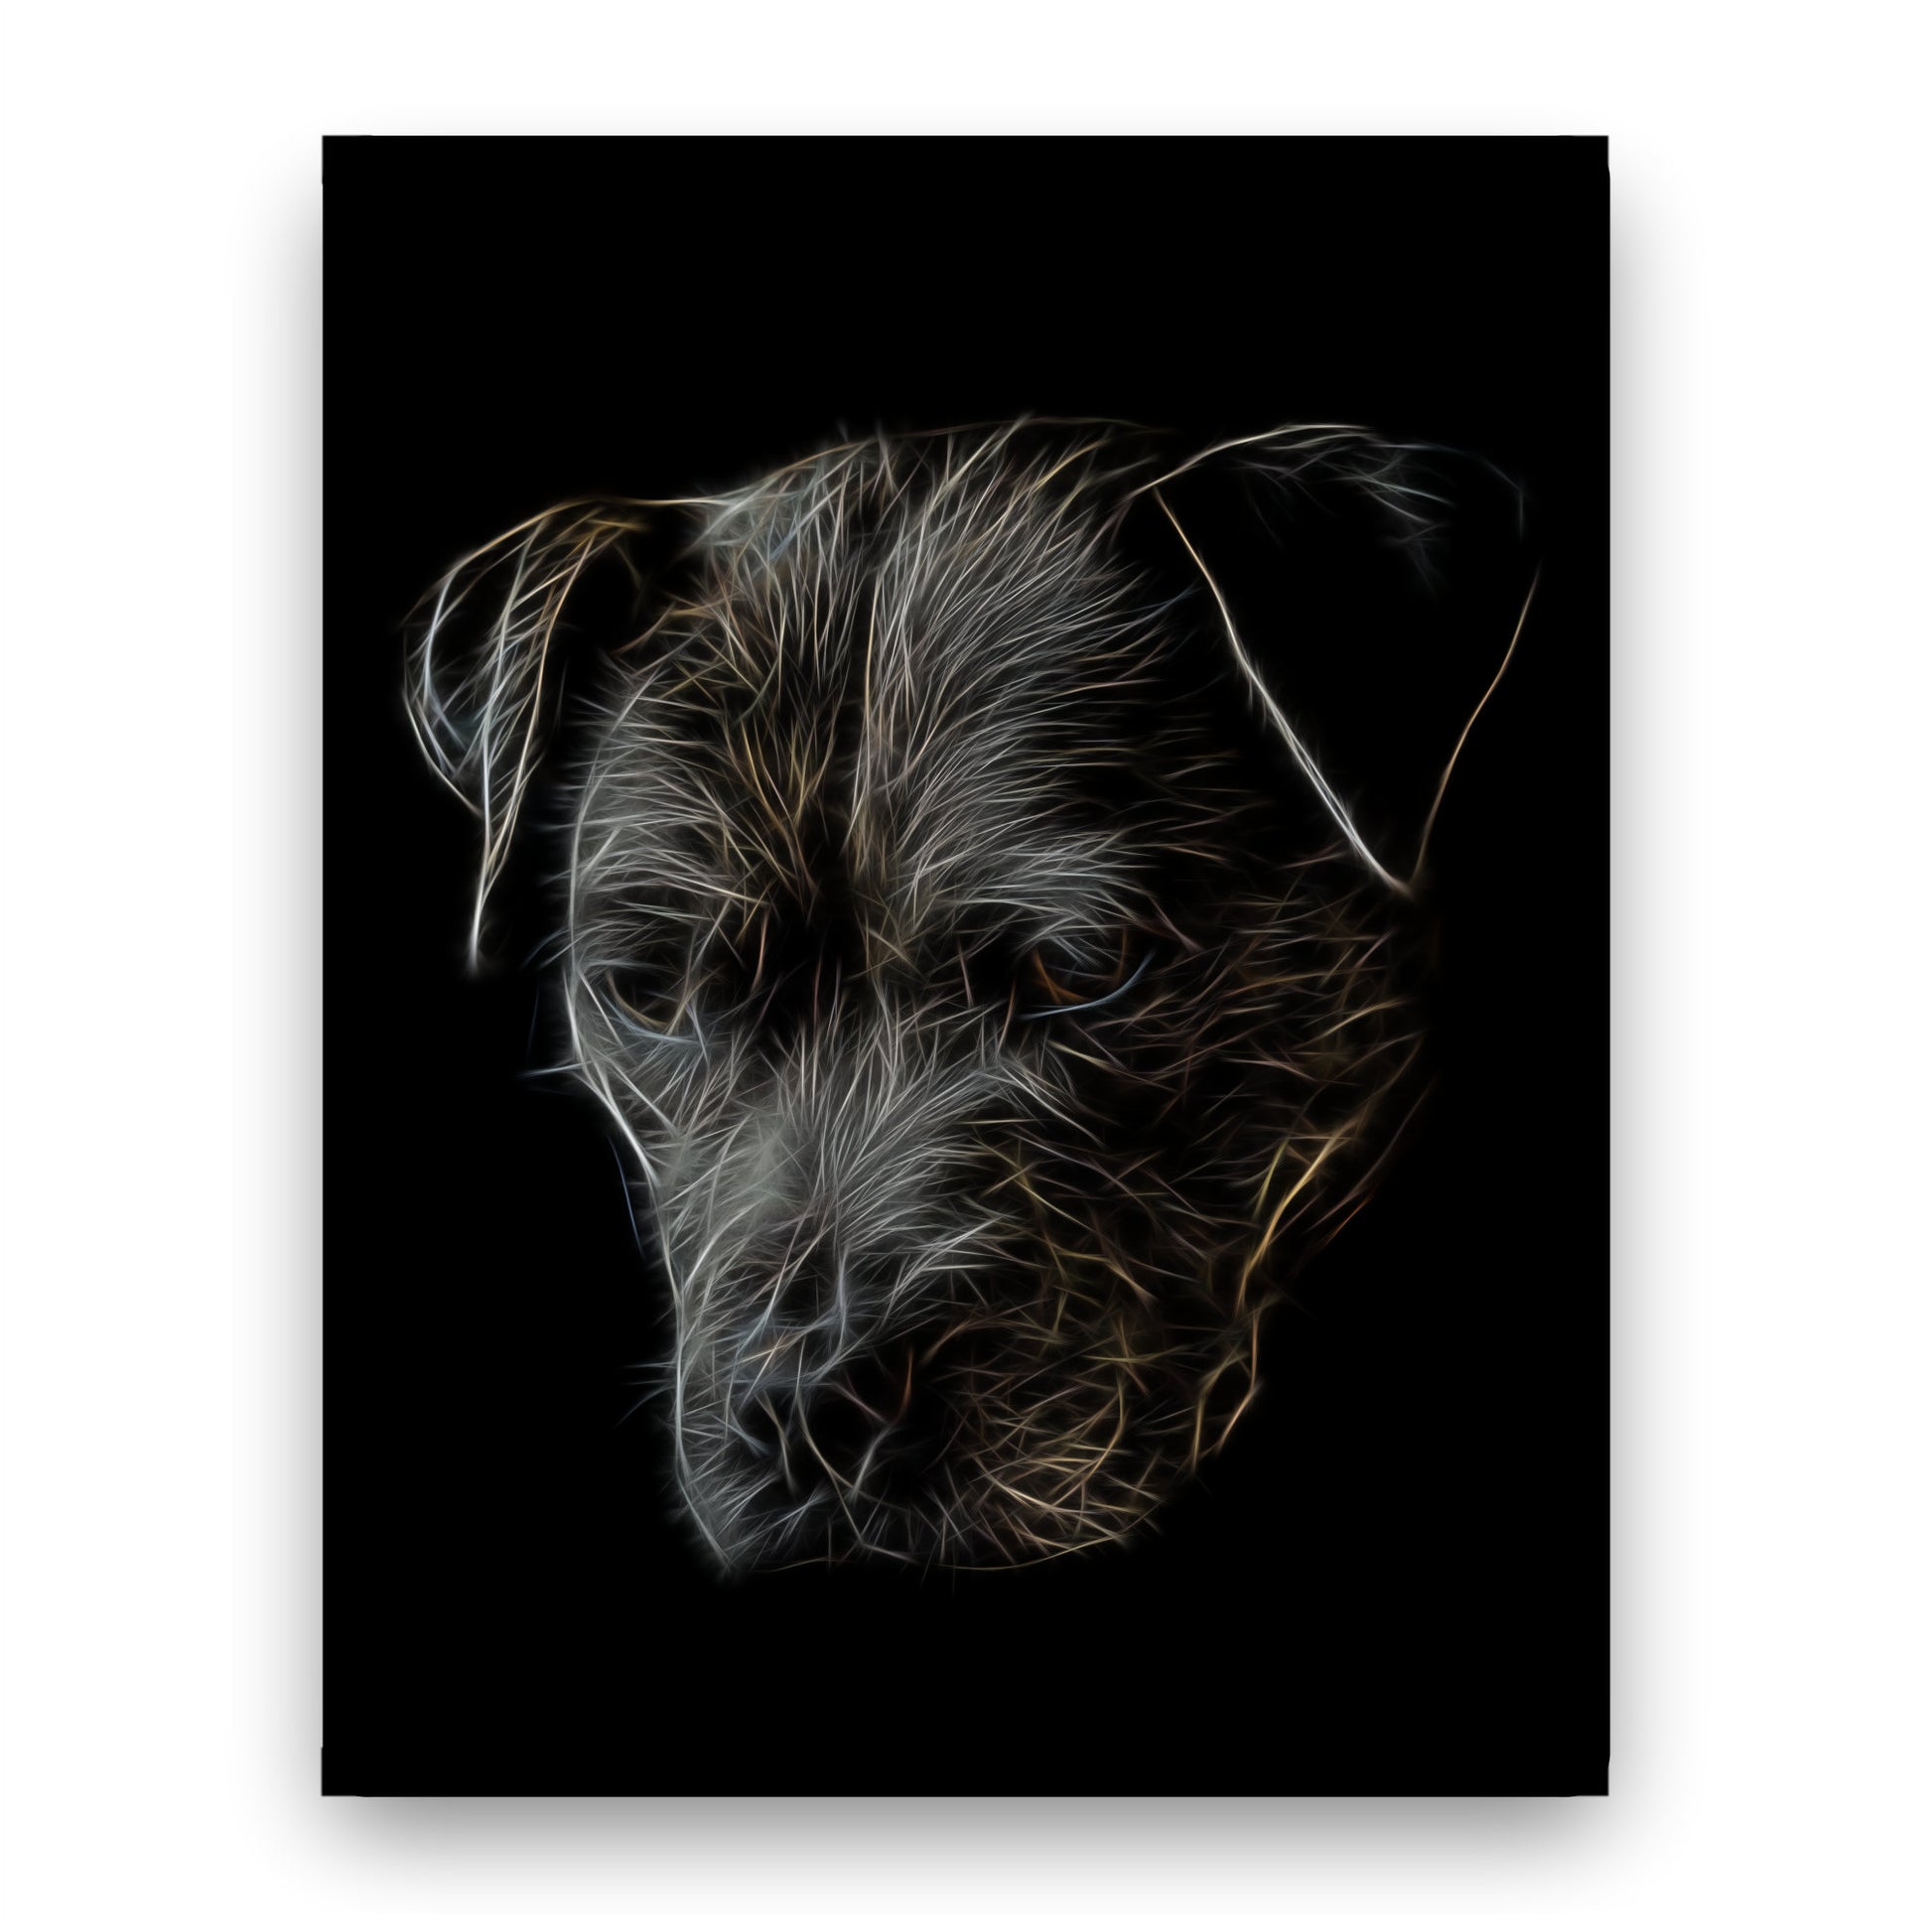 Black Staffordshire Bull Terrier Print with Stunning Fractal Art Design. Various Sizes Available